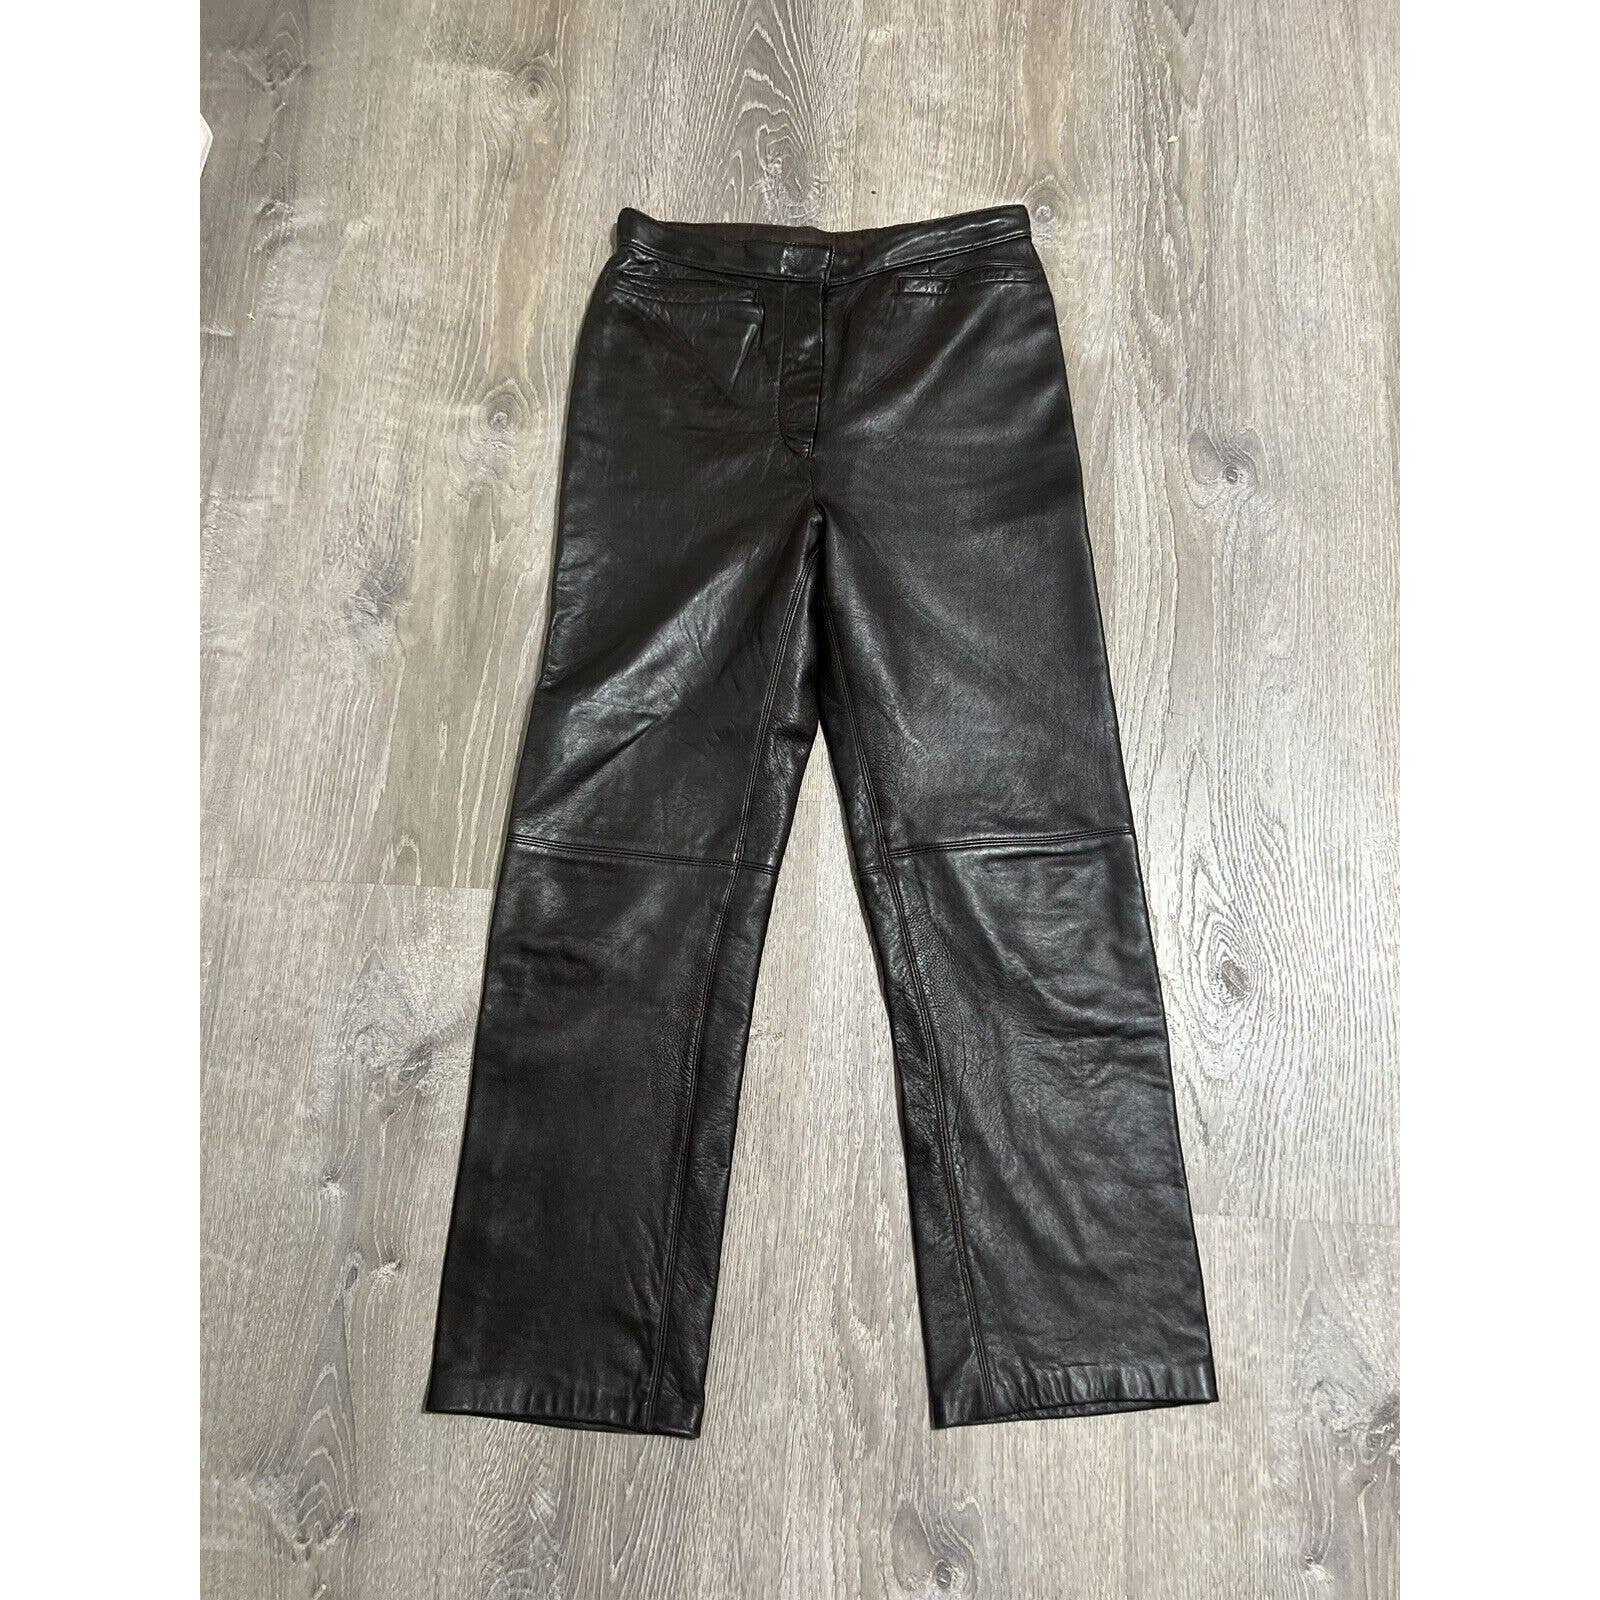 where to buy  Vintage Bikers Women´s Size 27 Genui